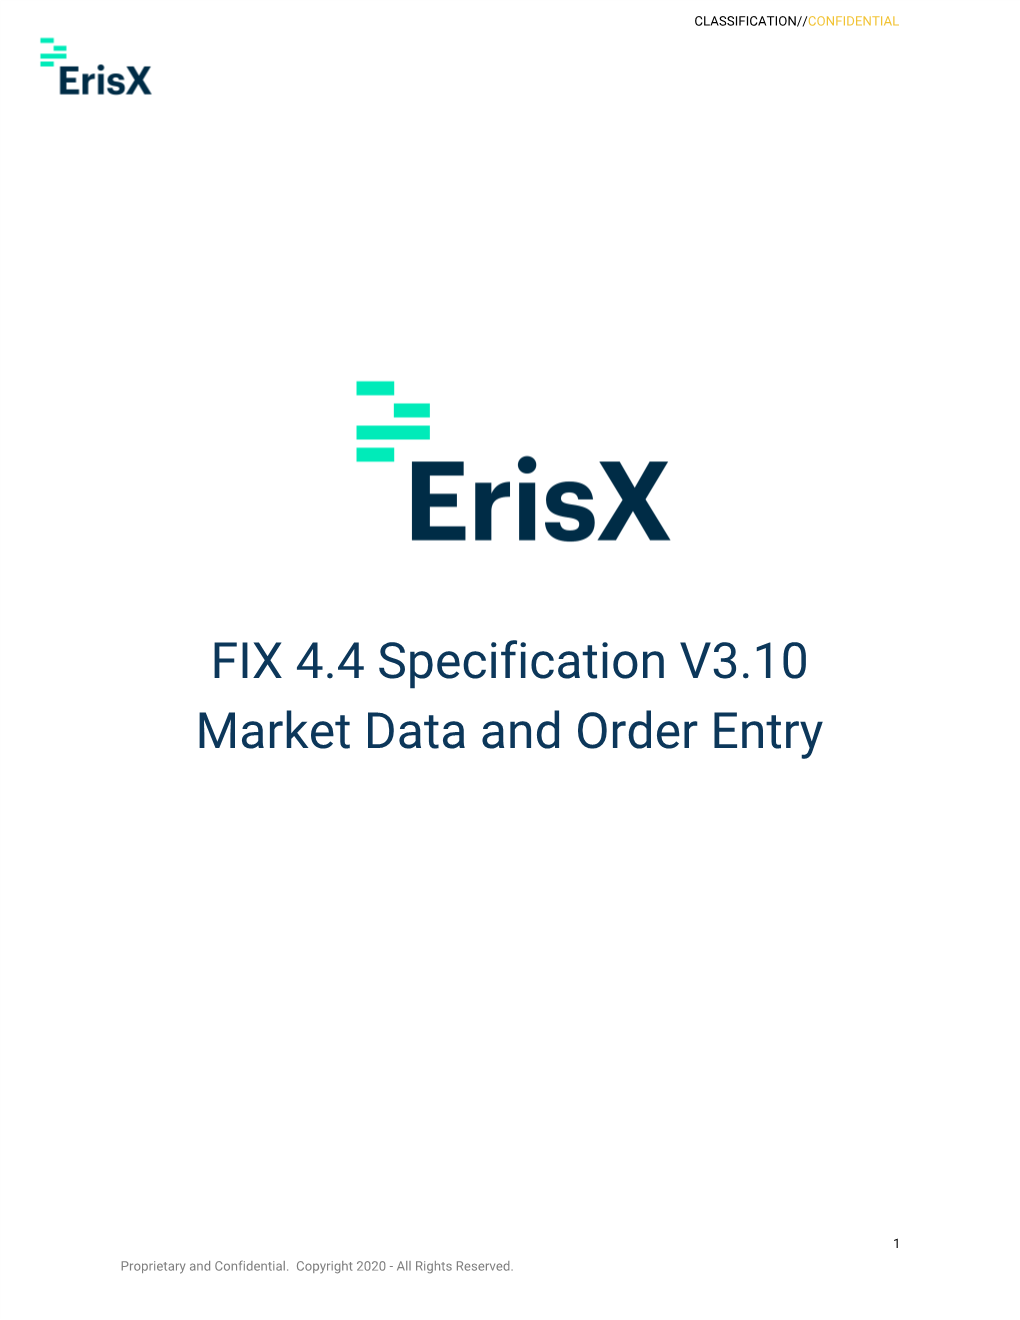 FIX 4.4 Specification V3.10 Market Data and Order Entry